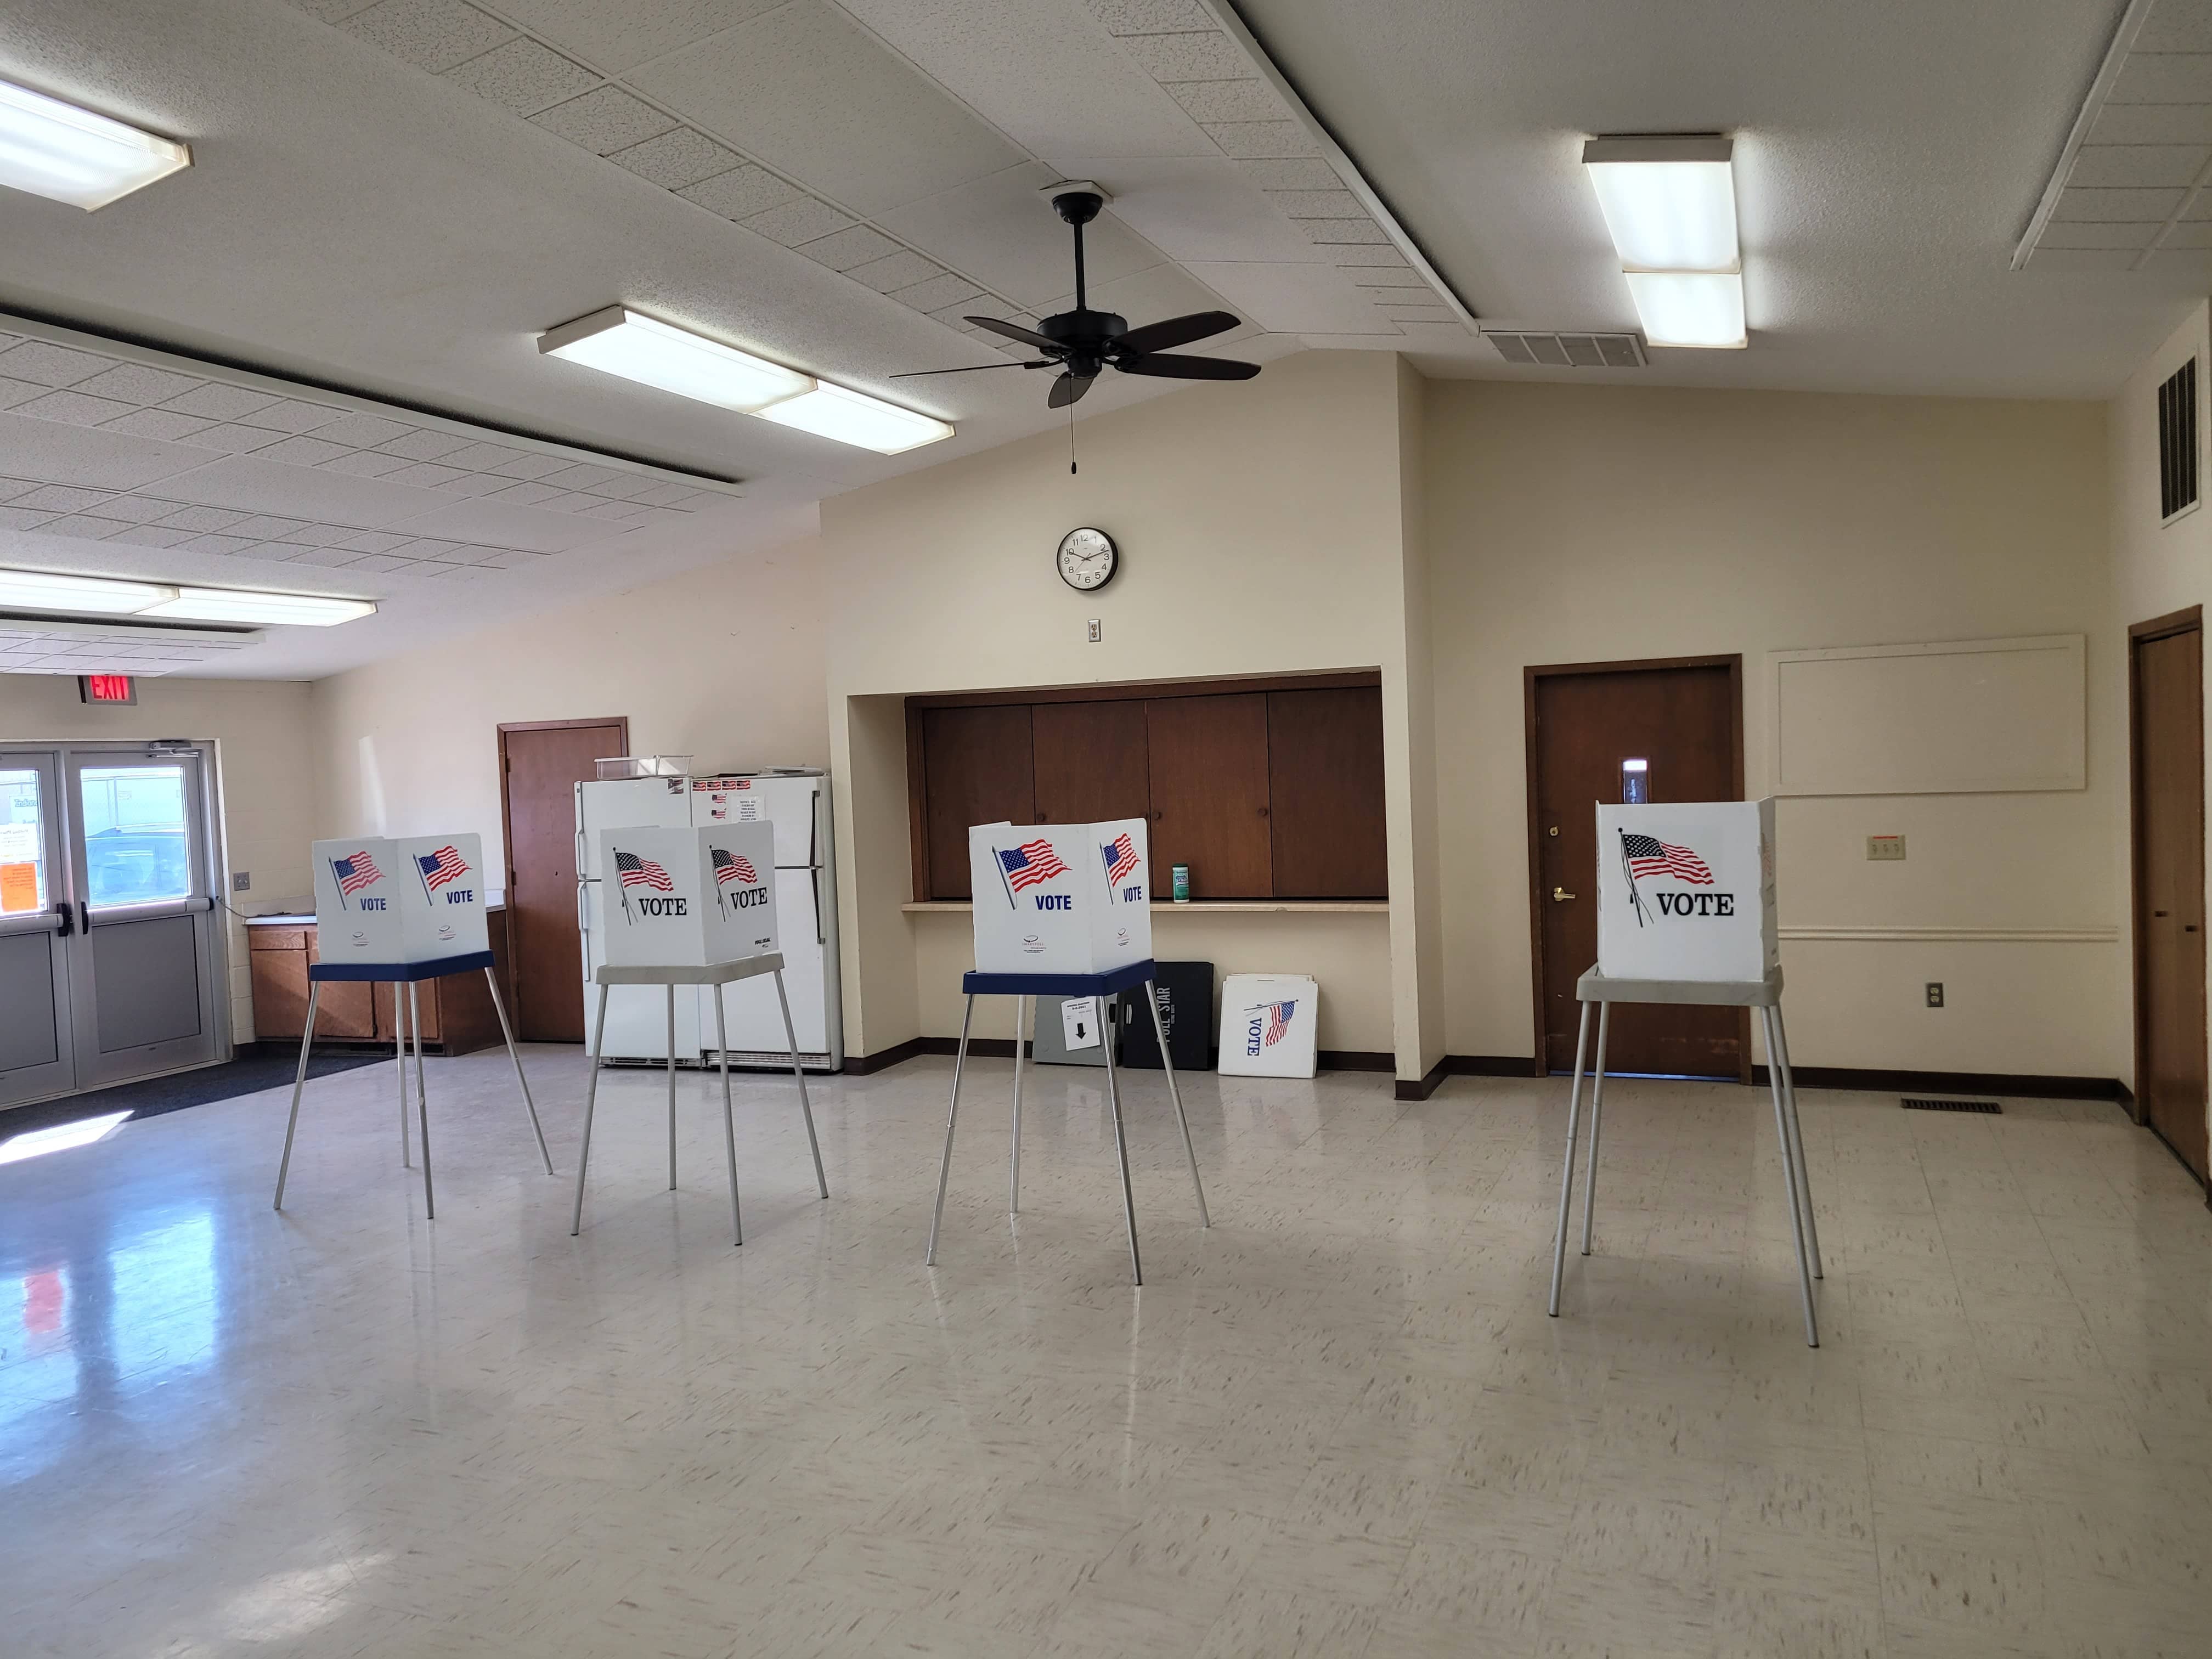 Indianola City Council and School Board Election Openings | KNIA KRLS